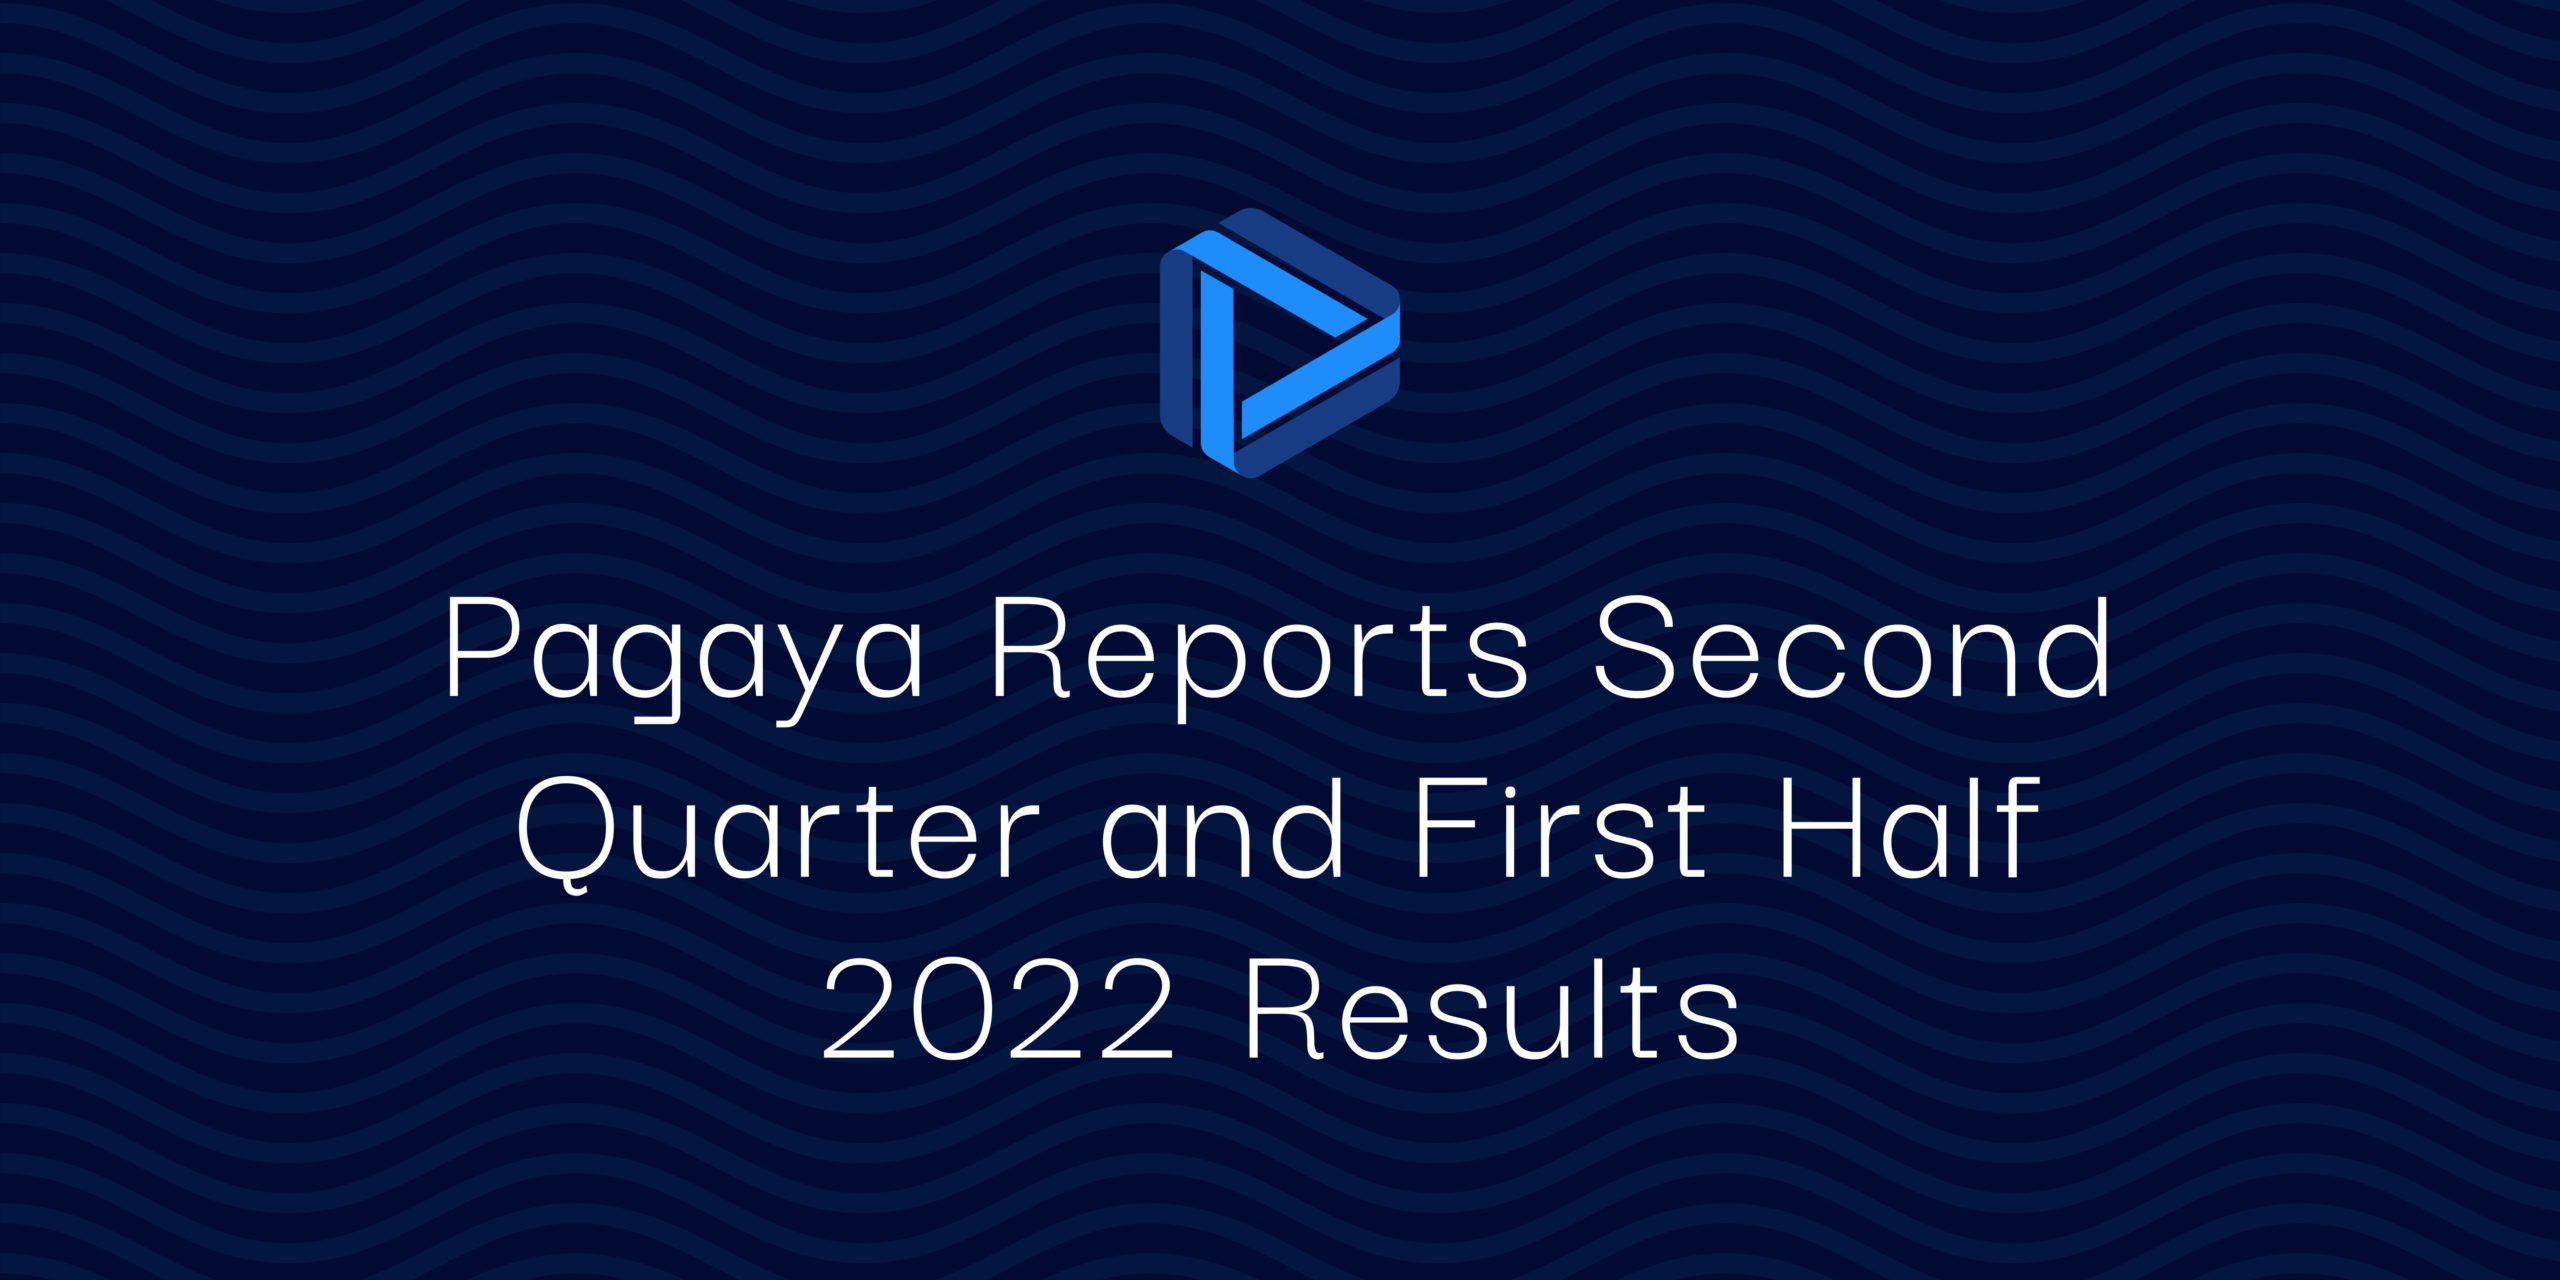 Pagaya Reports Second Quarter and First Half 2022 Results